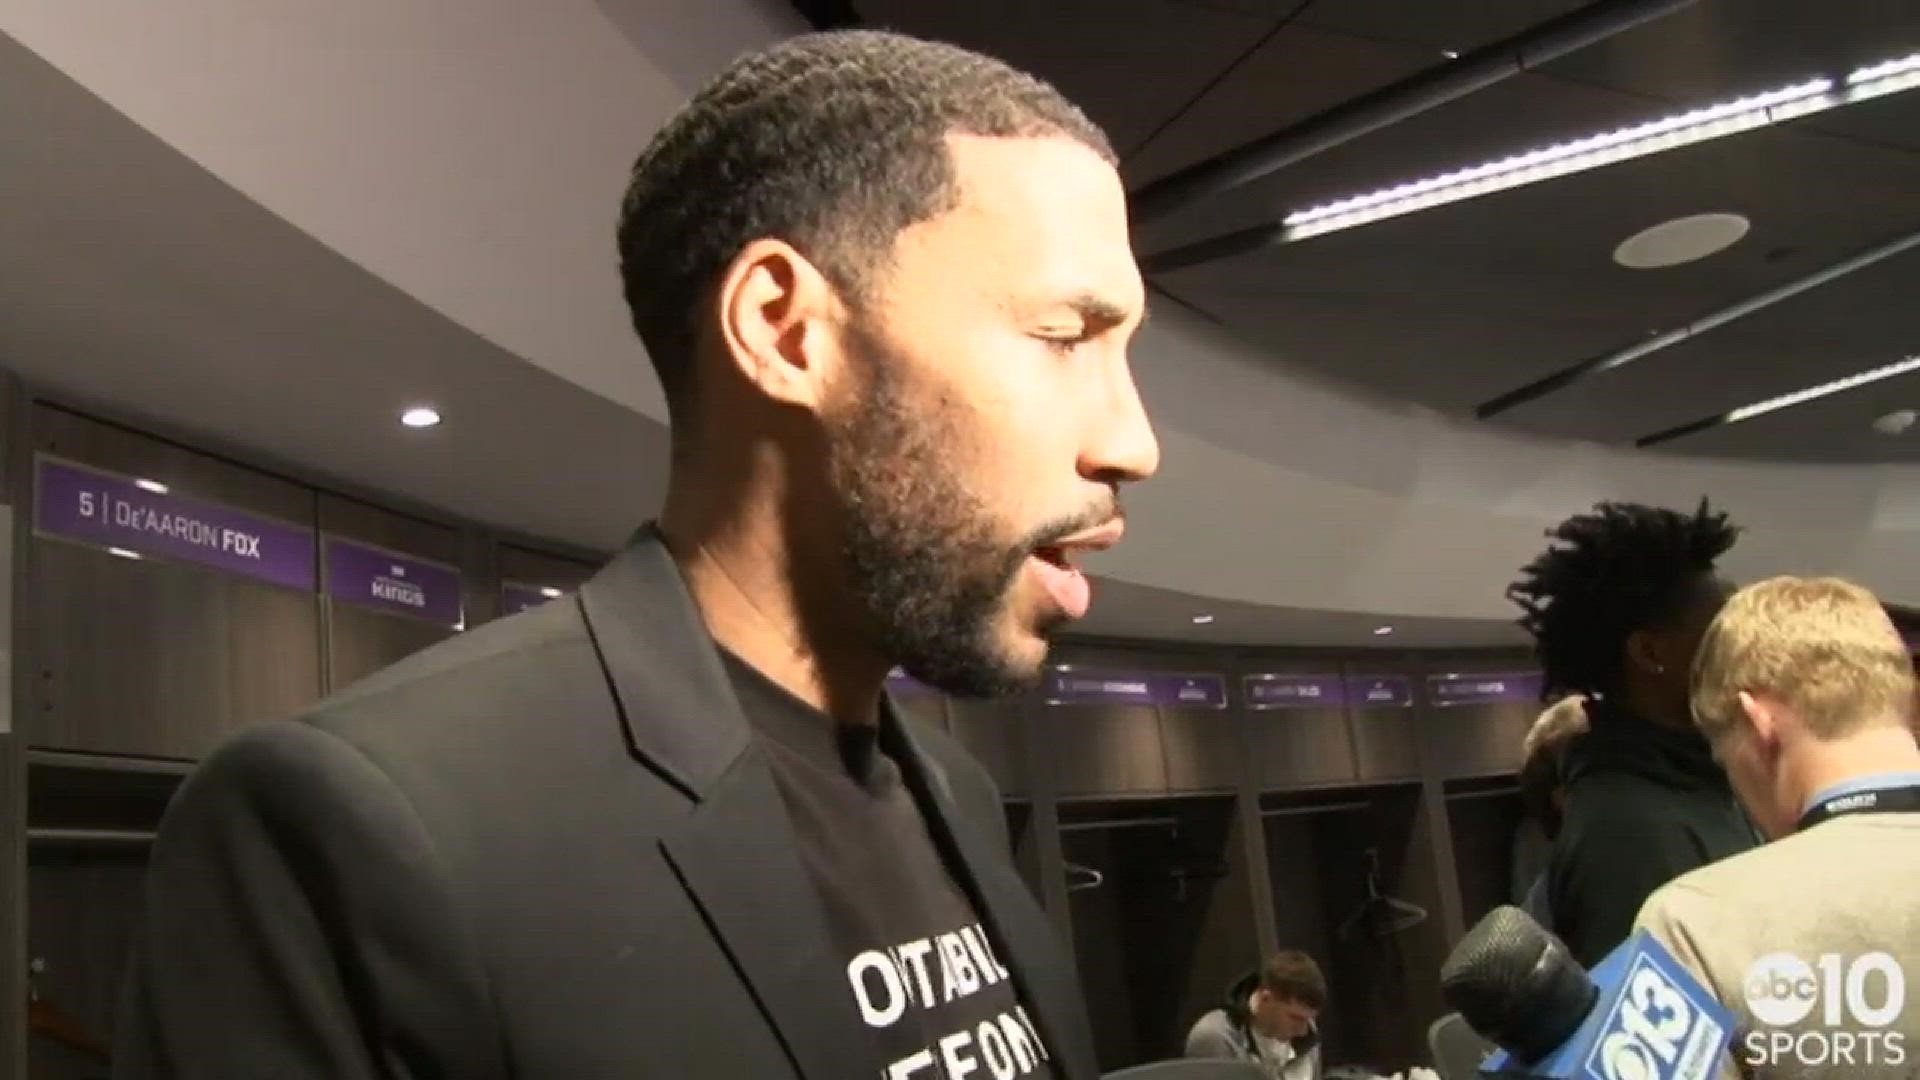 Kings forward Garrett Temple talks about the team's decision to wear shirts honoring the memory of Stephon Clark, who was killed in a police shooting in Sacramento last week.